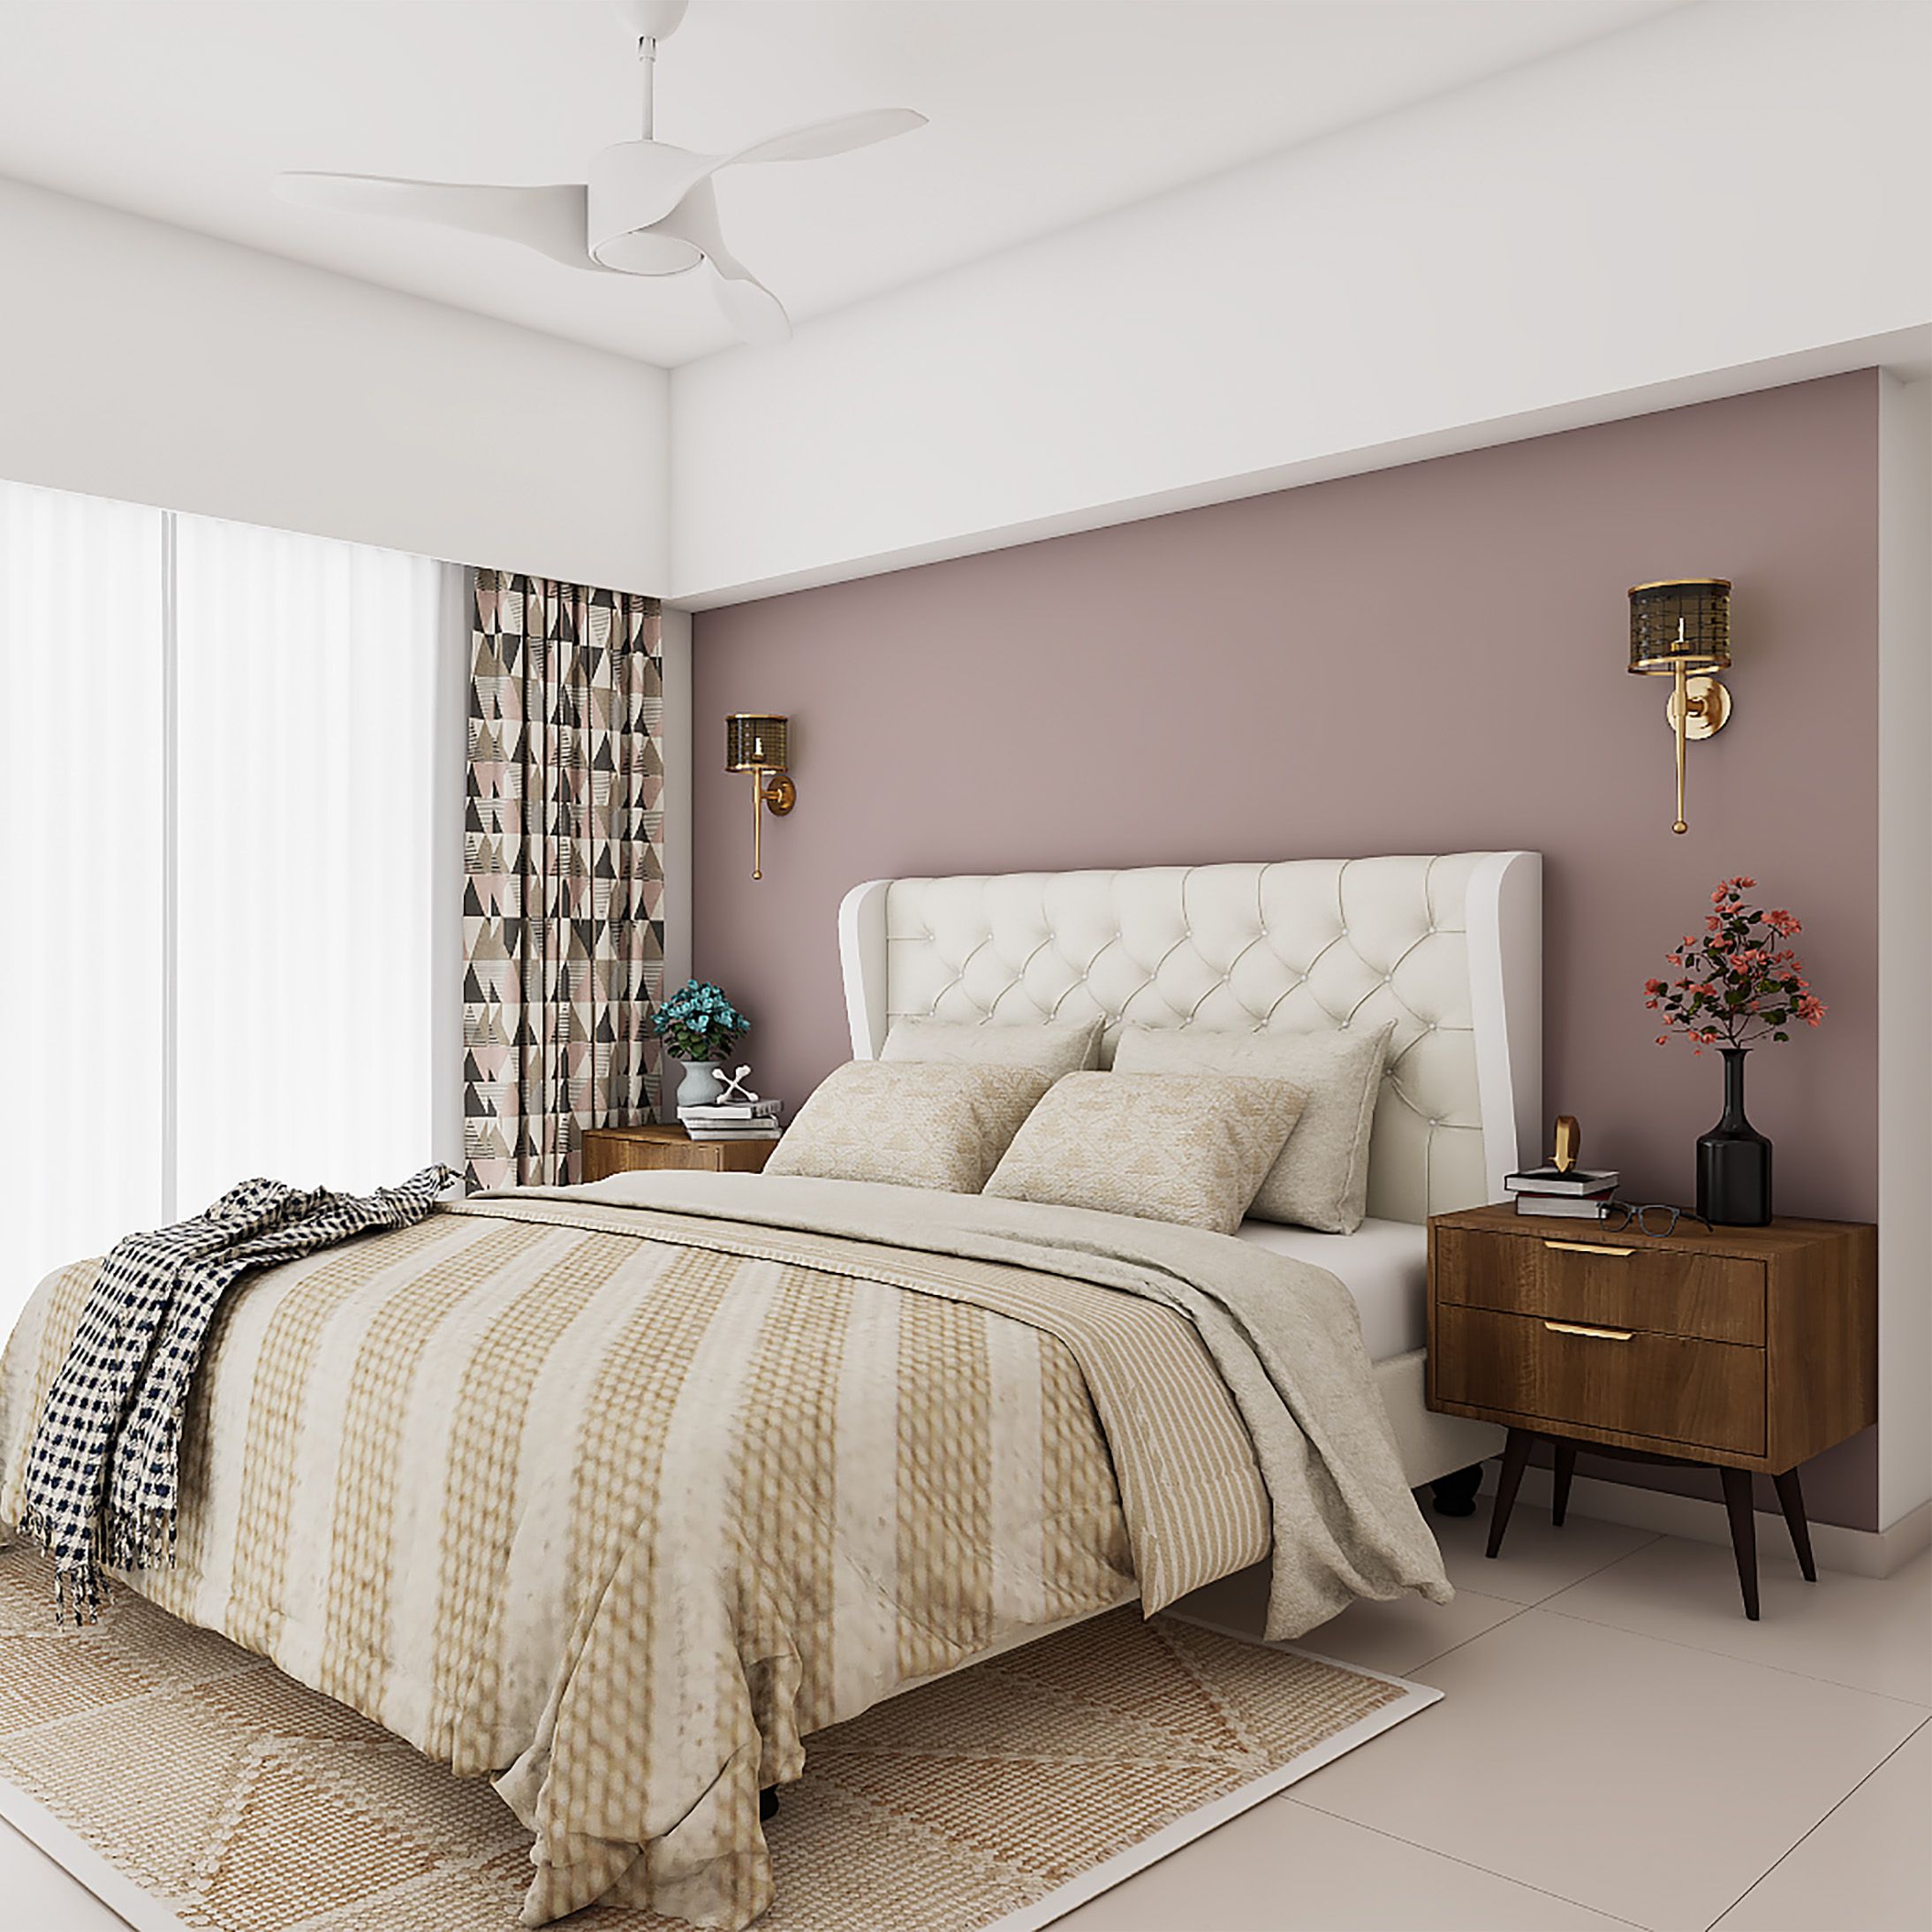 Modern Rose Pink Bedroom Wall Paint Design With White Furniture